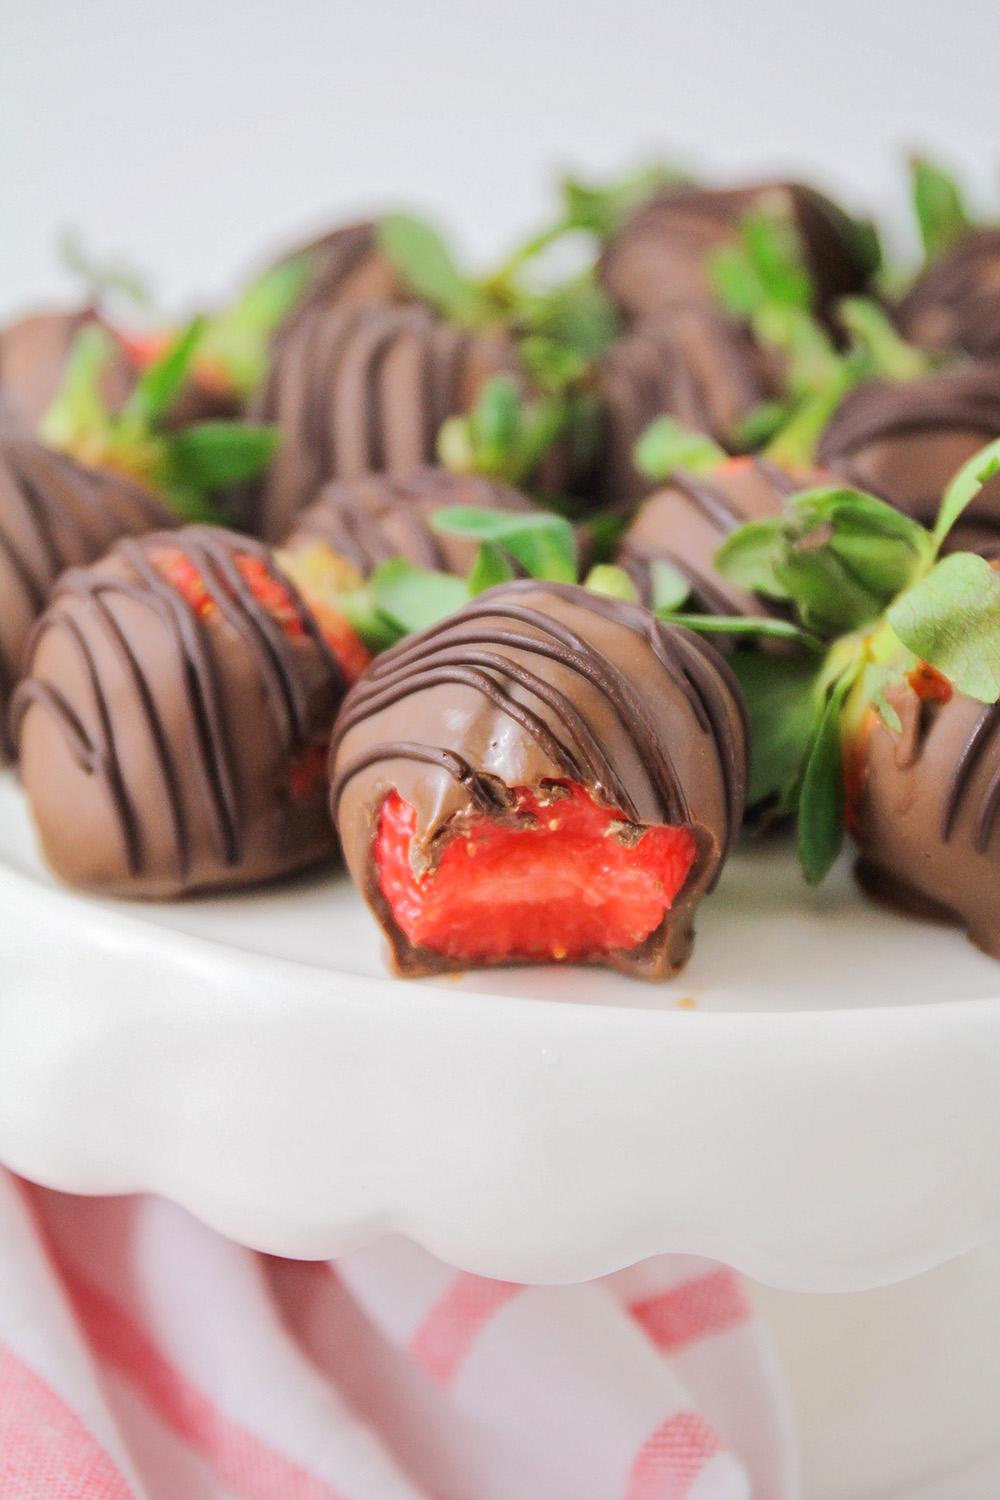 These homemade chocolate covered strawberries are so easy to make and so delicious! They're the perfect romantic dessert for Valentine's Day!